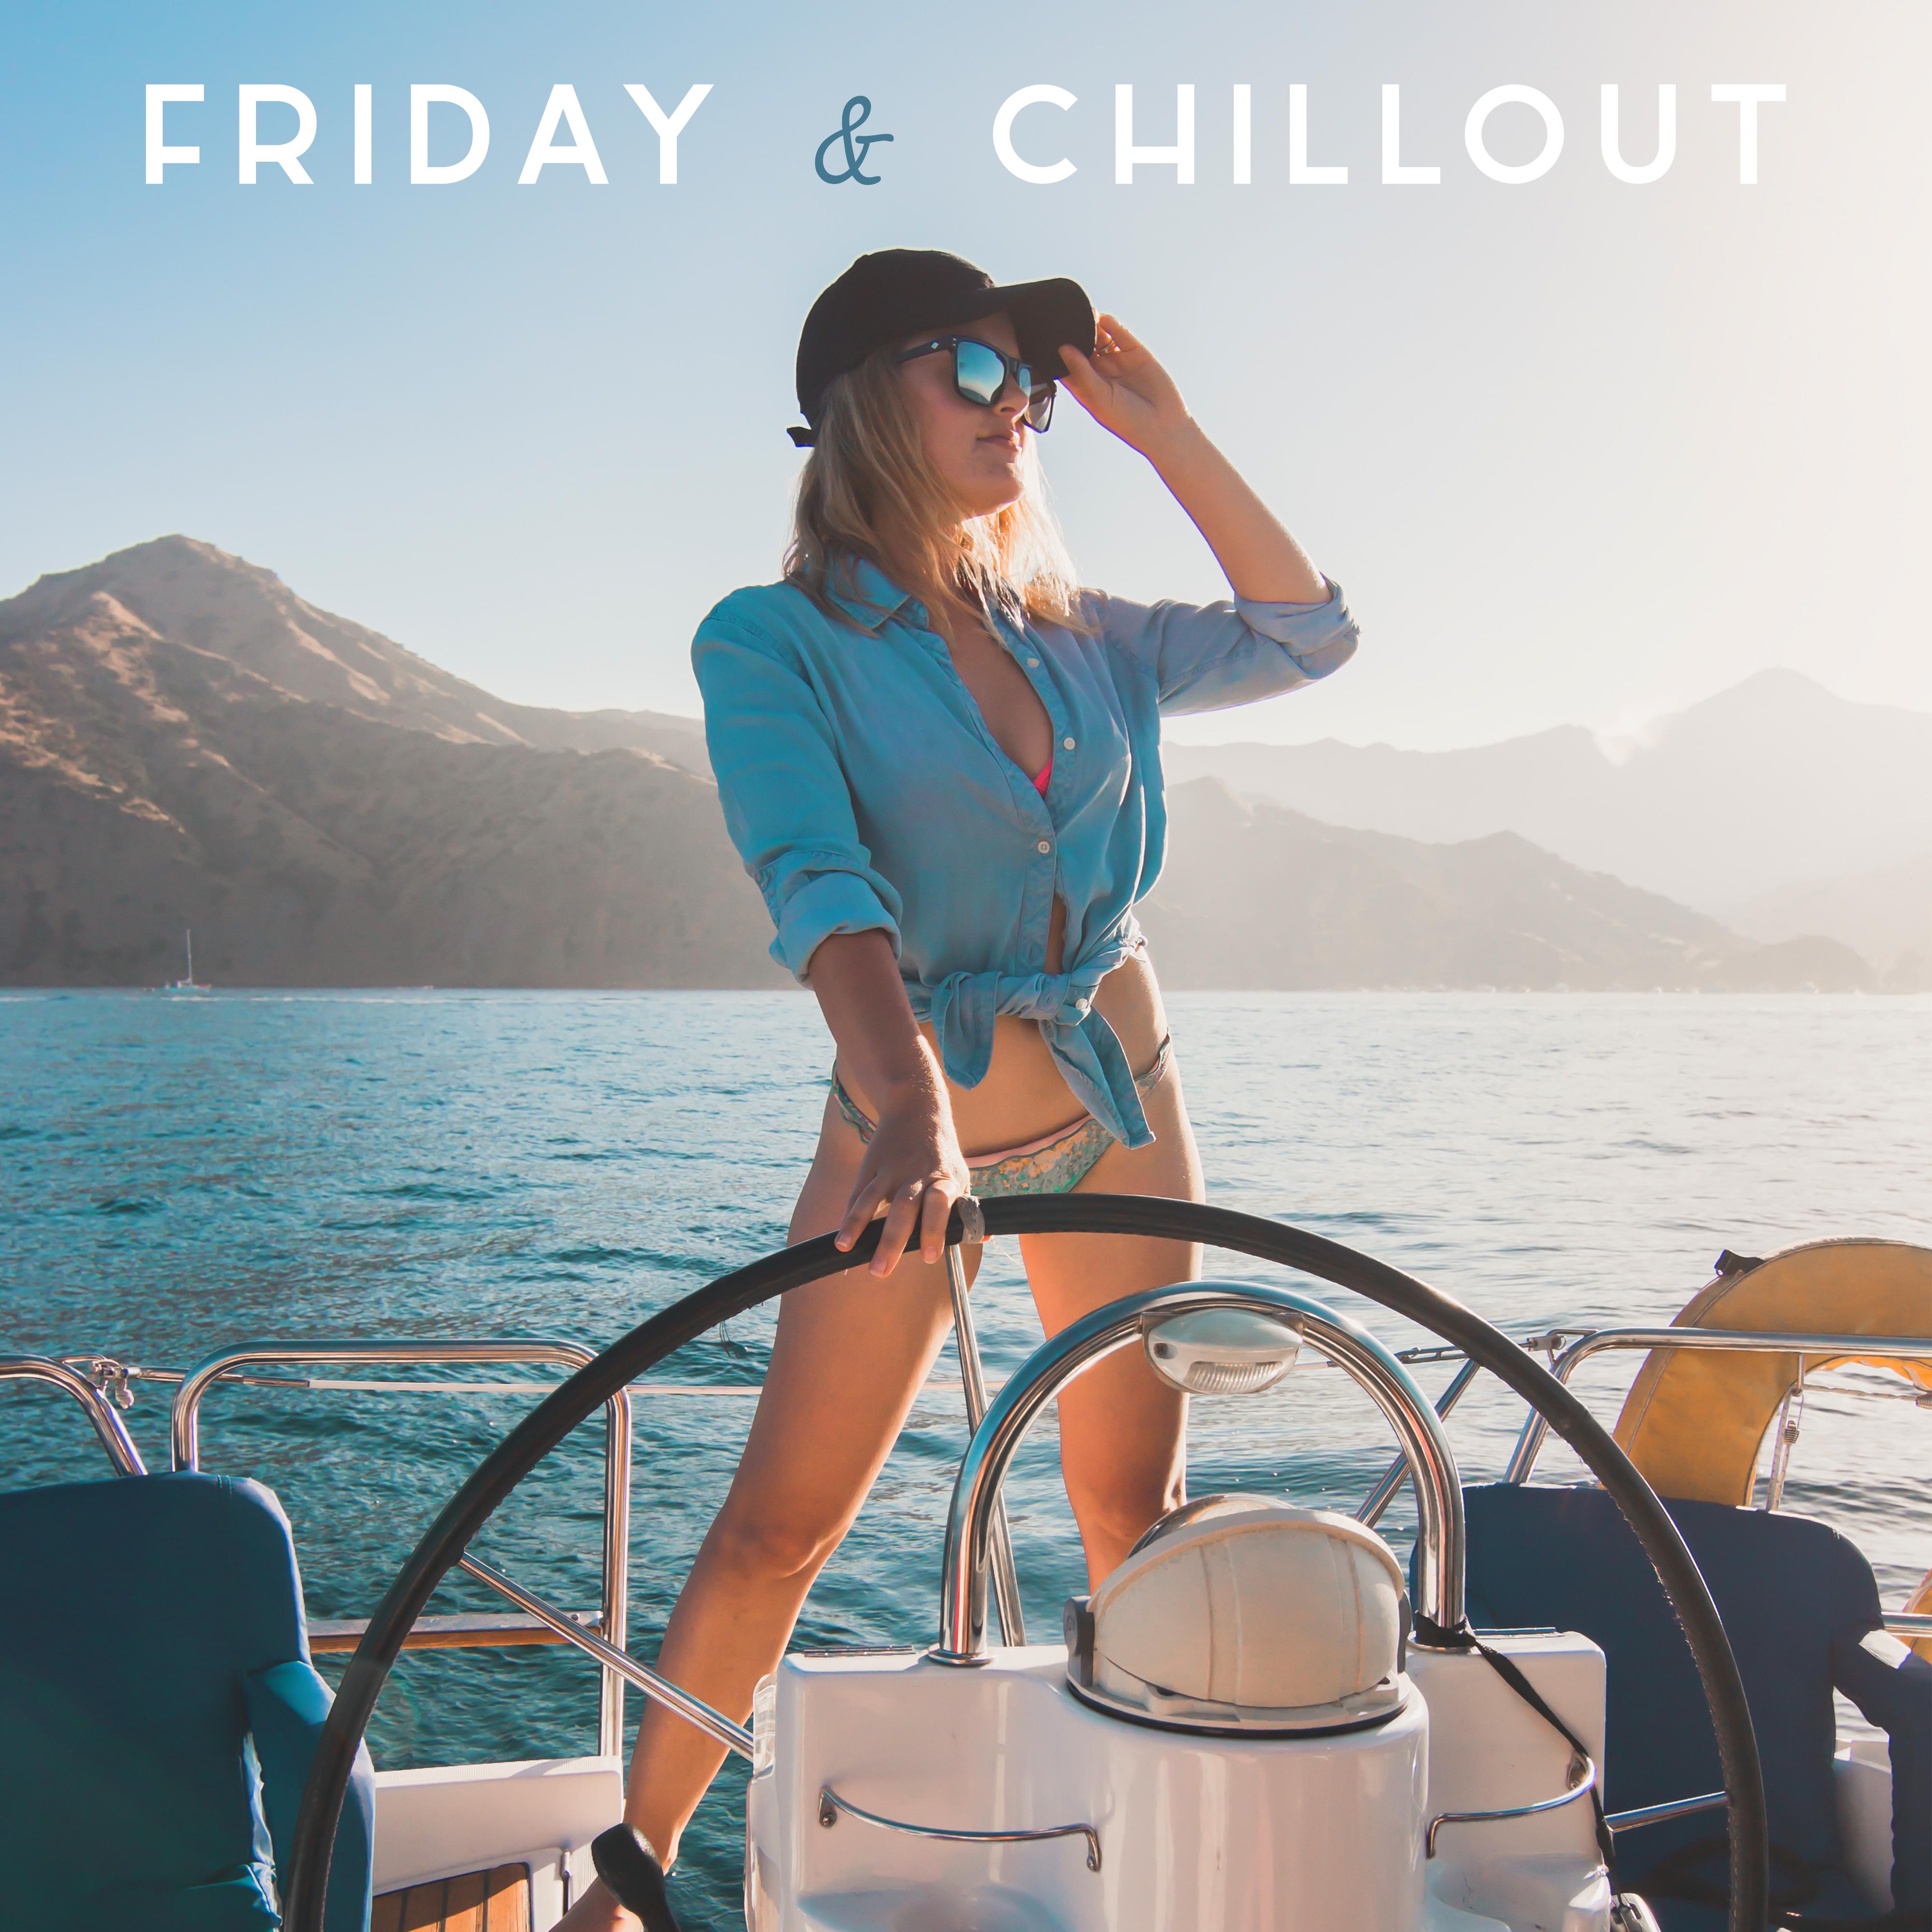 Friday & Chillout